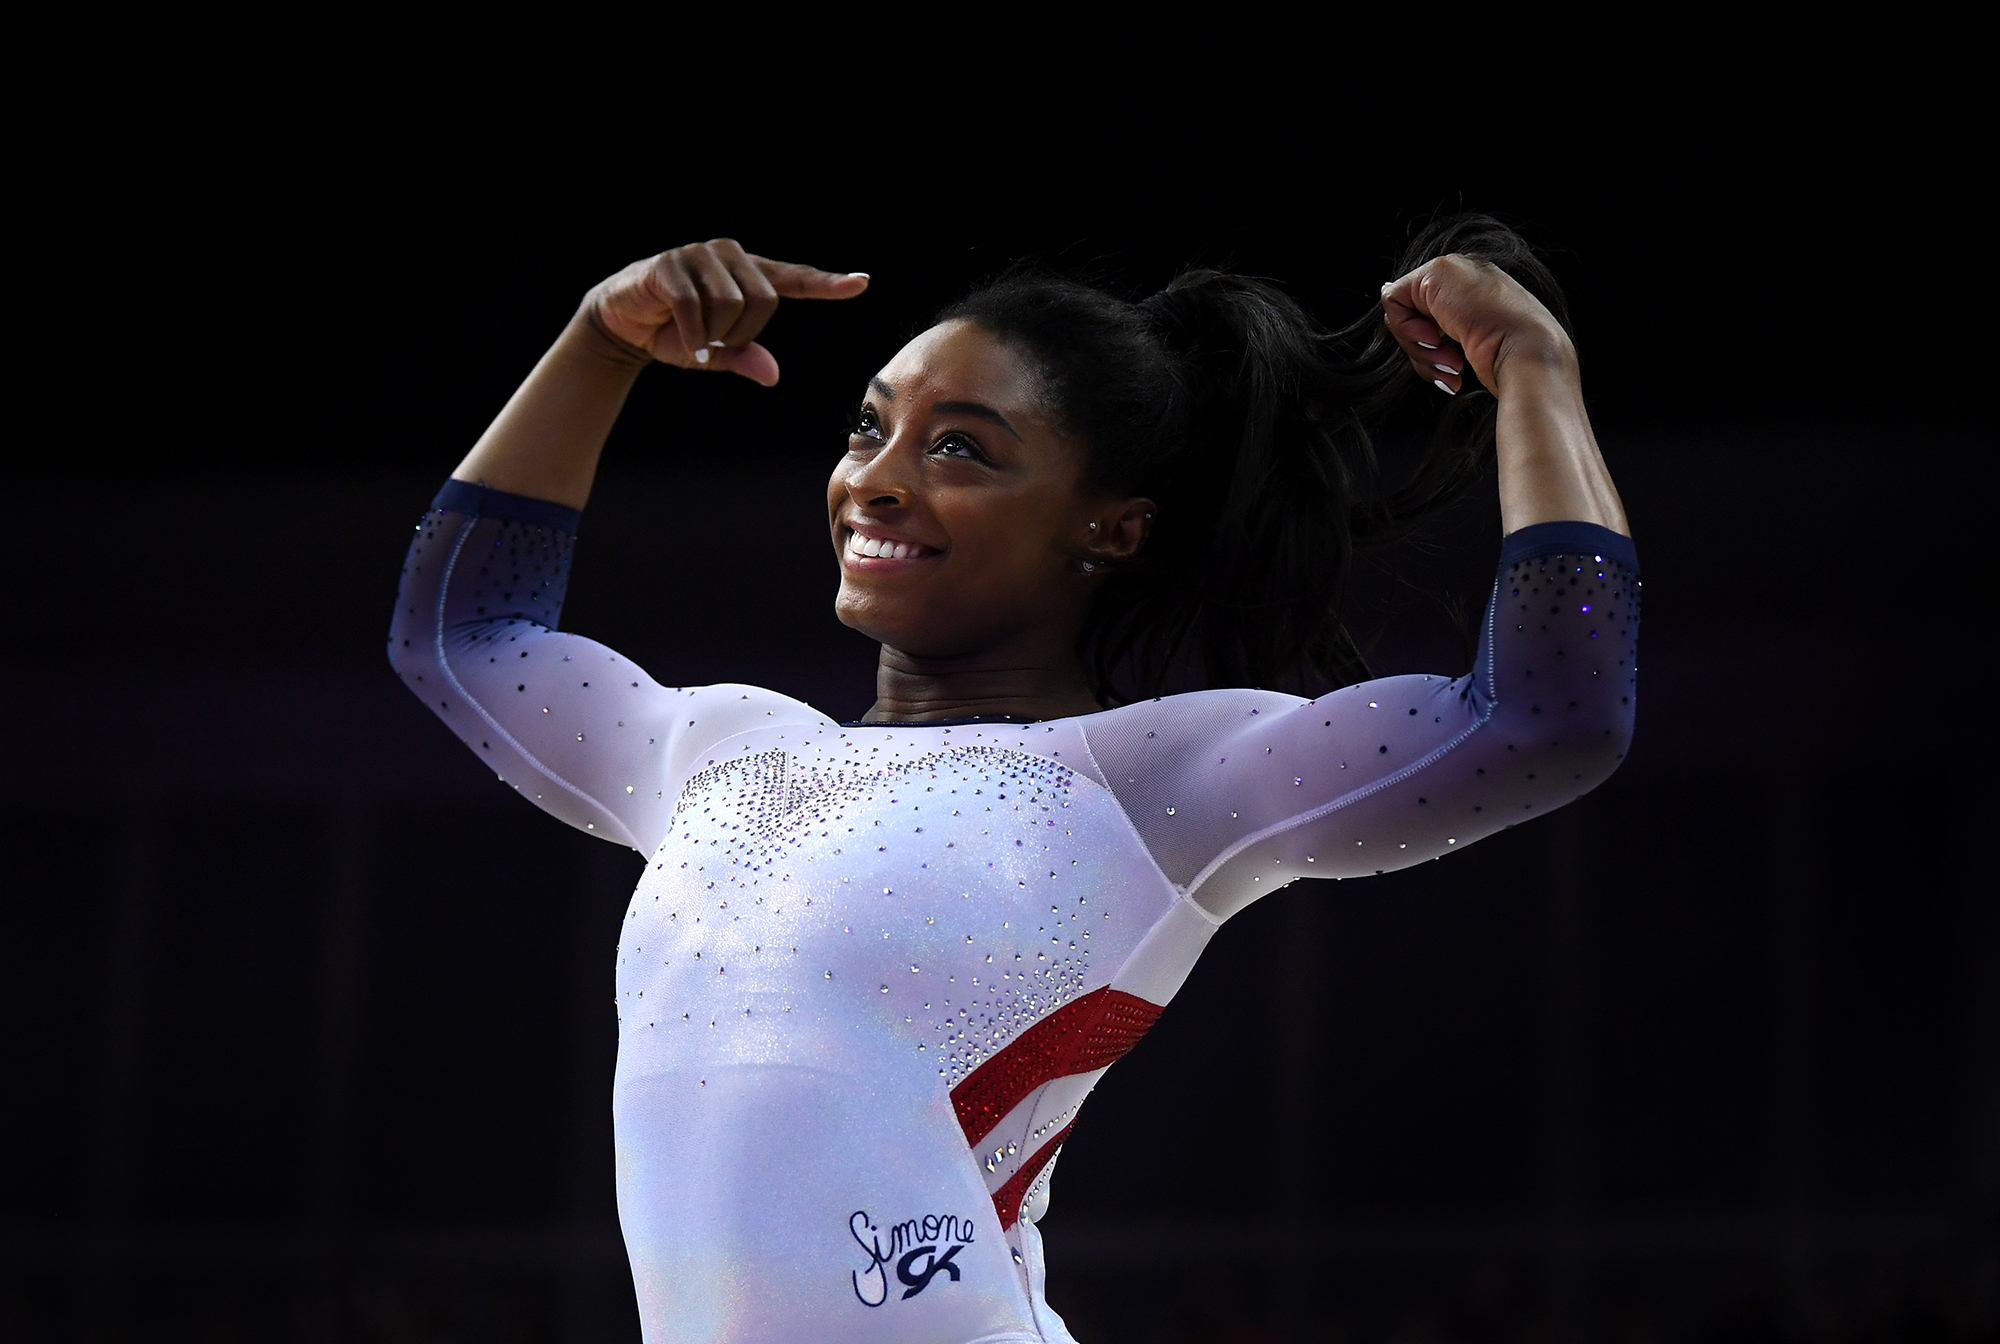 The Simone Biles Triple Double Video Is Epic in SlowMo Time